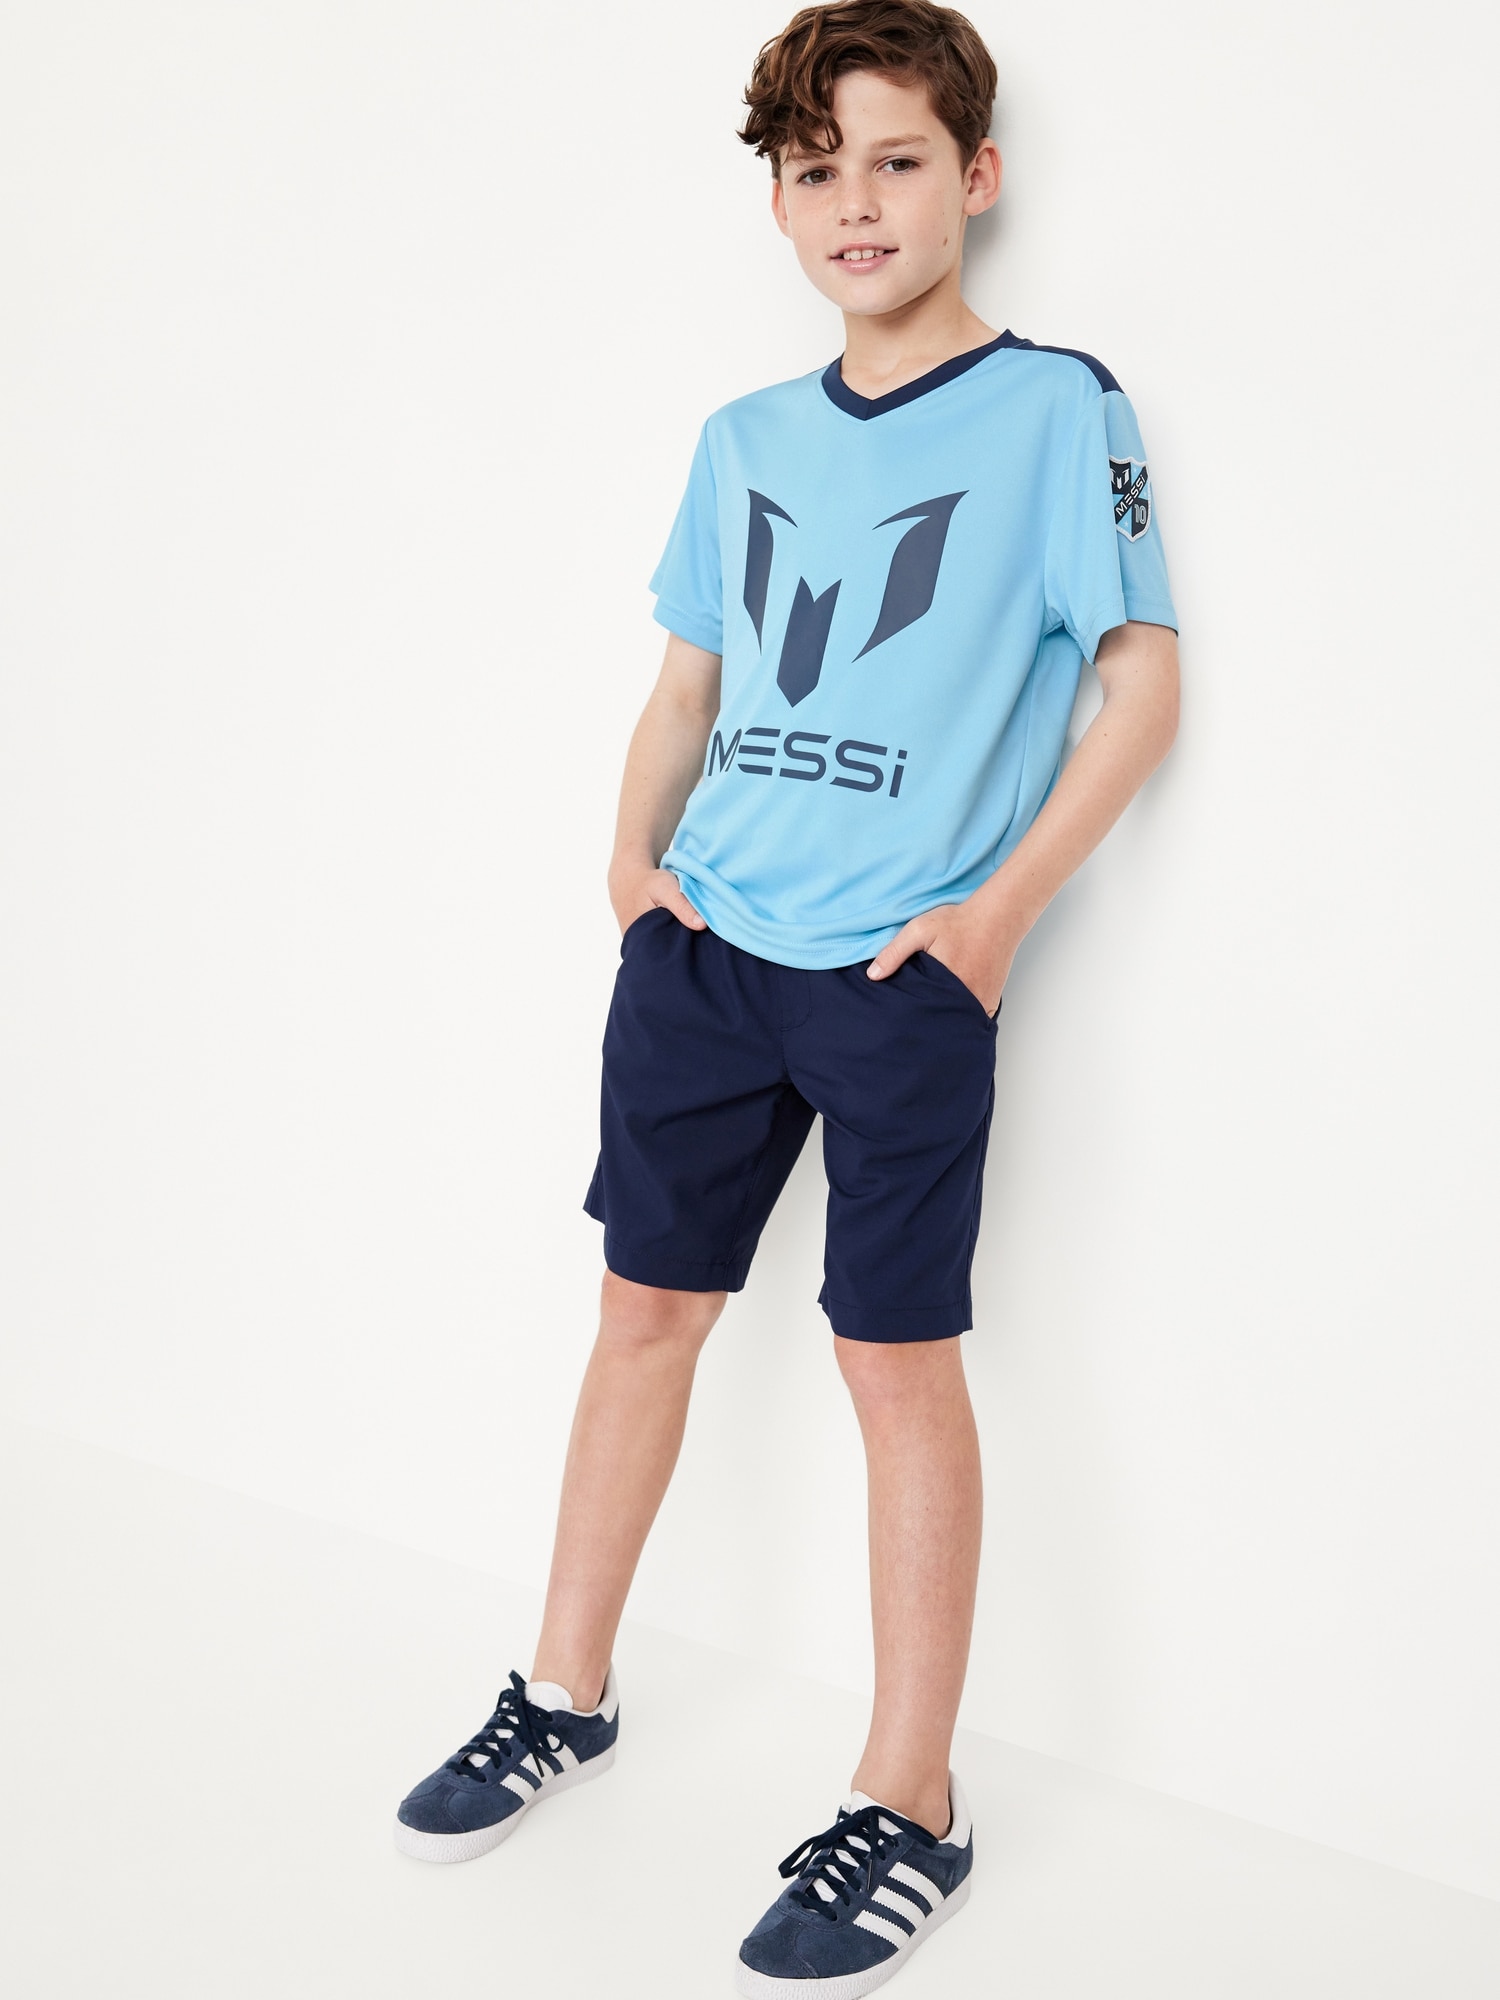 Messi™ Lifestyle Jersey T-Shirt for Boys